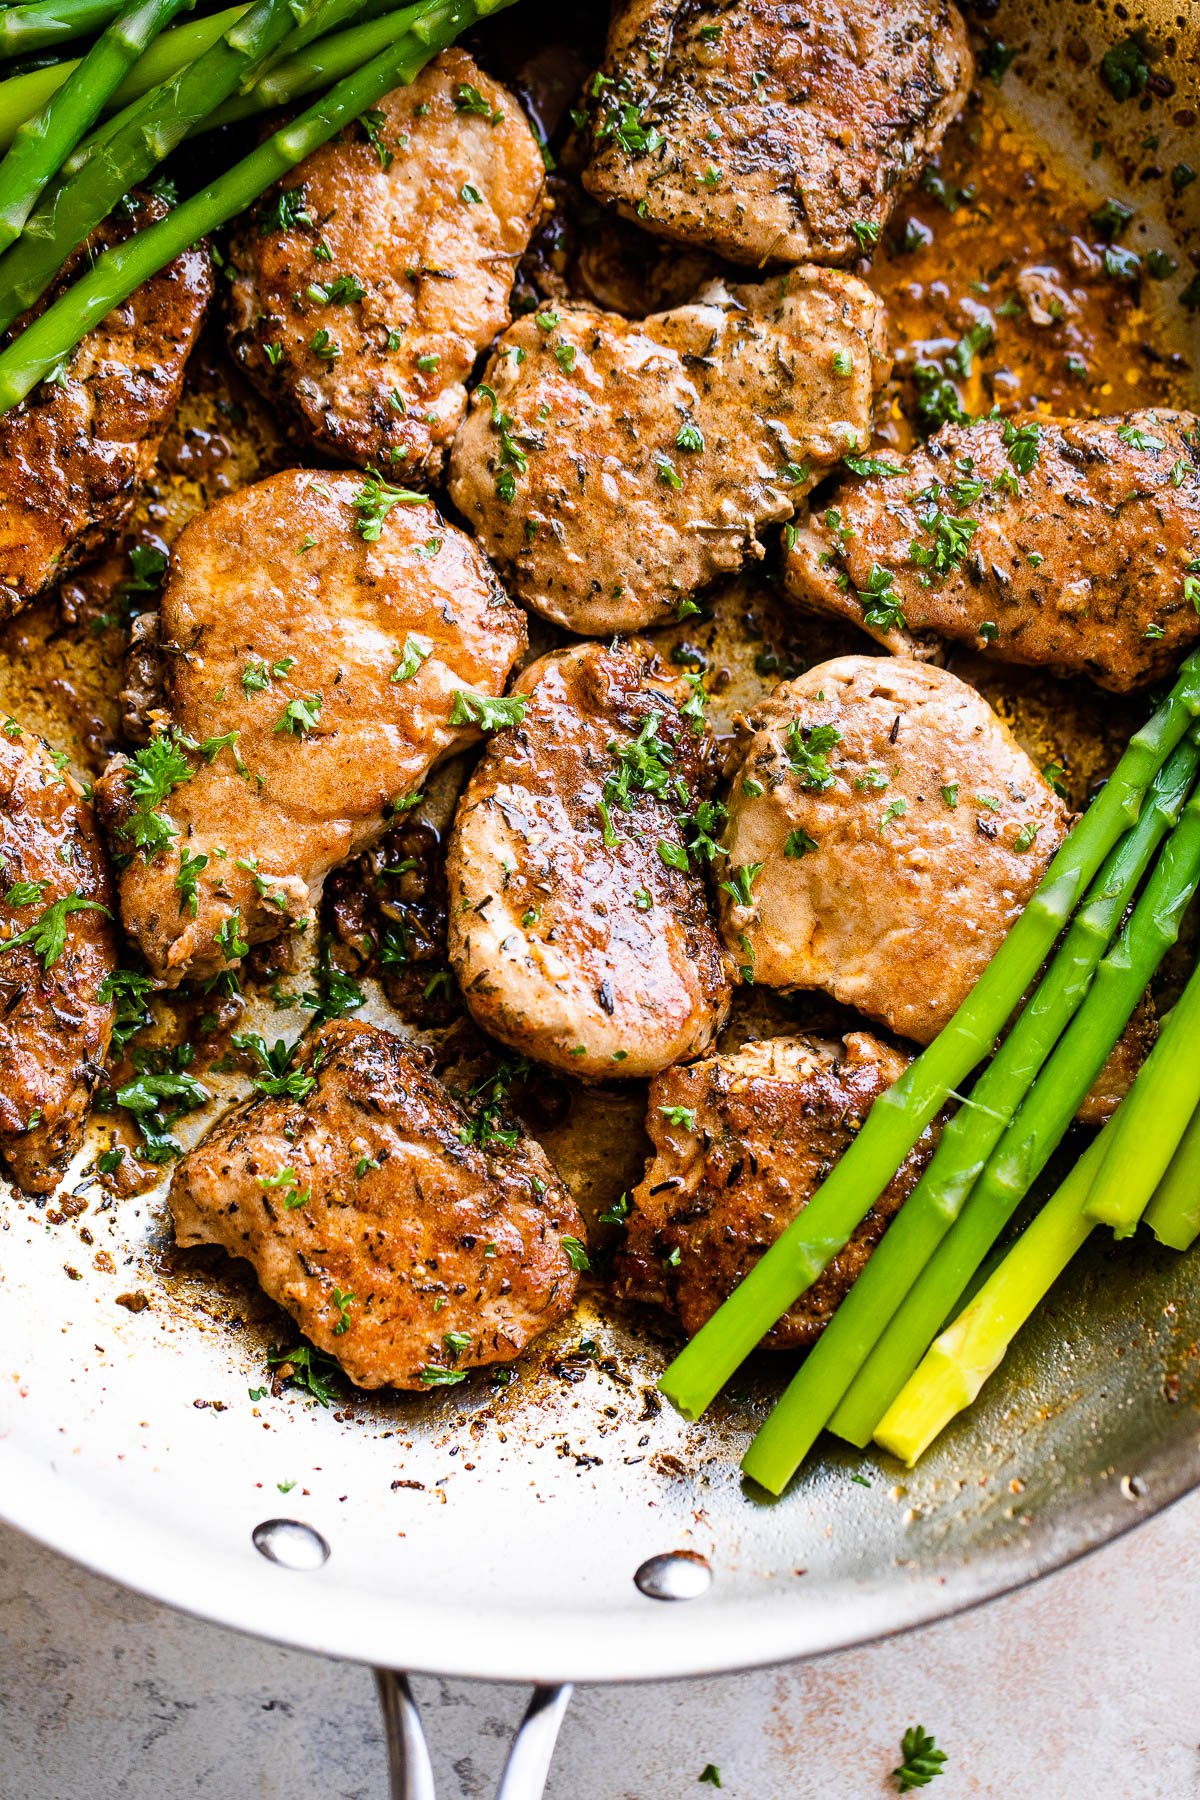 stainless skillet with pork medallions and asparagus